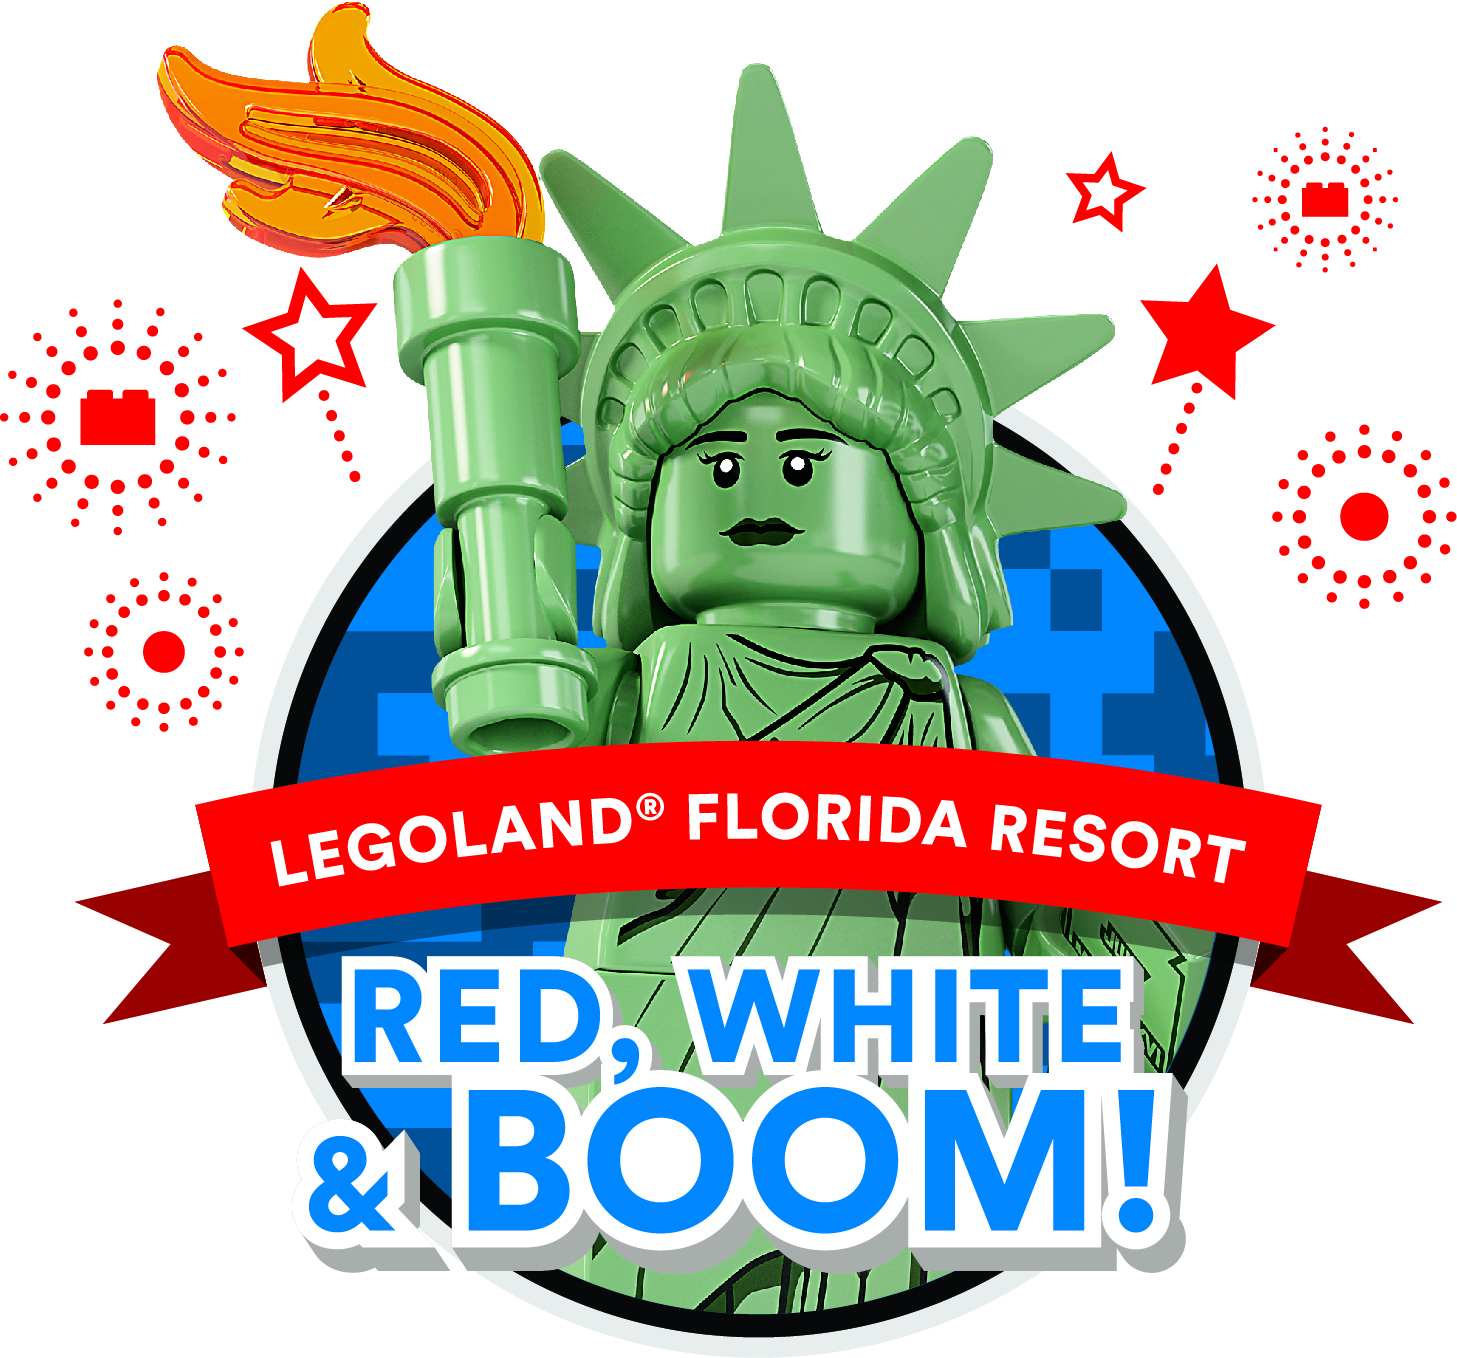 LEGOLAND Florida Resort Kicks Off Awe-Summer Event Series with Independence Day Celebration Red, White and Boom